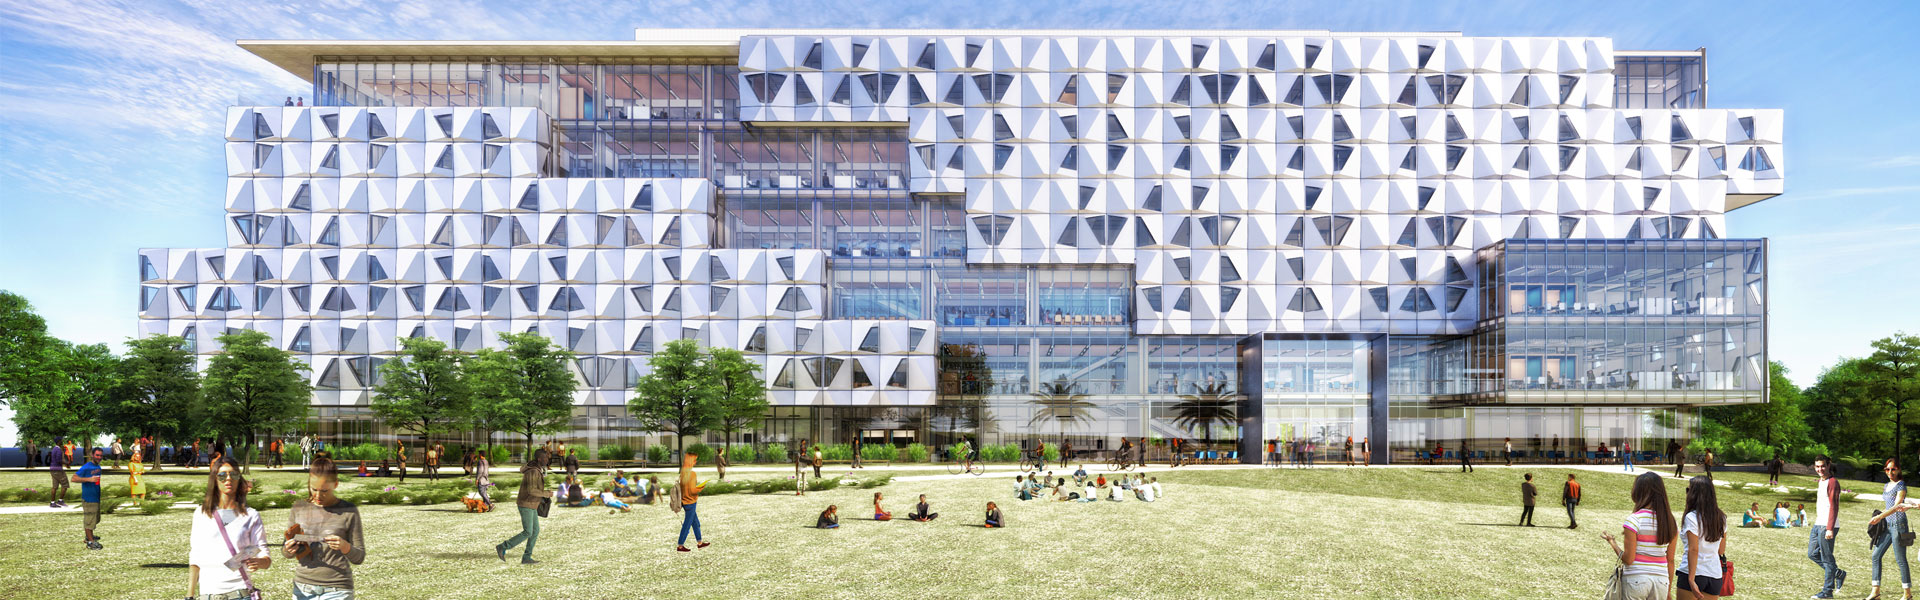 GO to UF to Begin Construction on Malachowsky Hall for Data Science & Information Technology